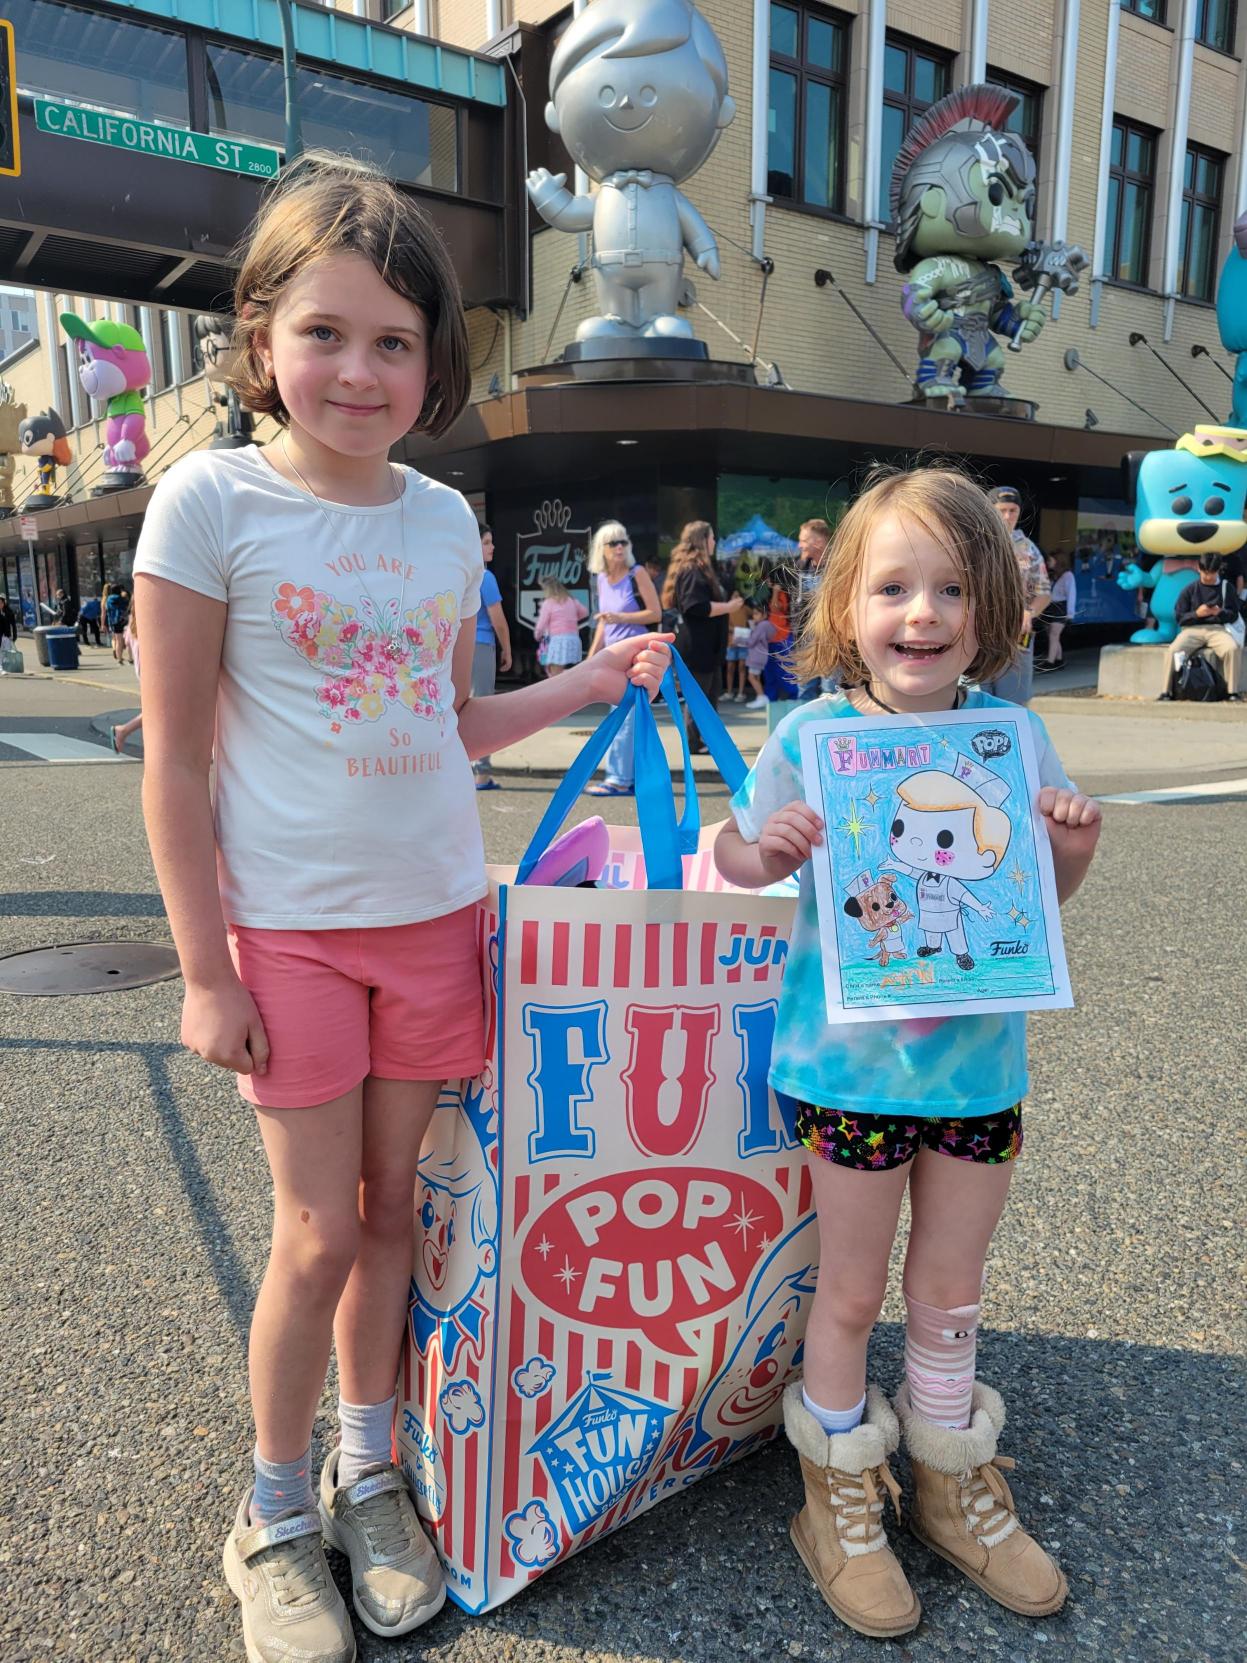 Children Enjoying the Day: Two children stand in front of the Funko Everett headquarters, holding a picture they’ve colored and a giant bag filled with goodies. In the background, you can see the sign for California Street, Funko statues on the outside of the building, and people lining up to go into the store.